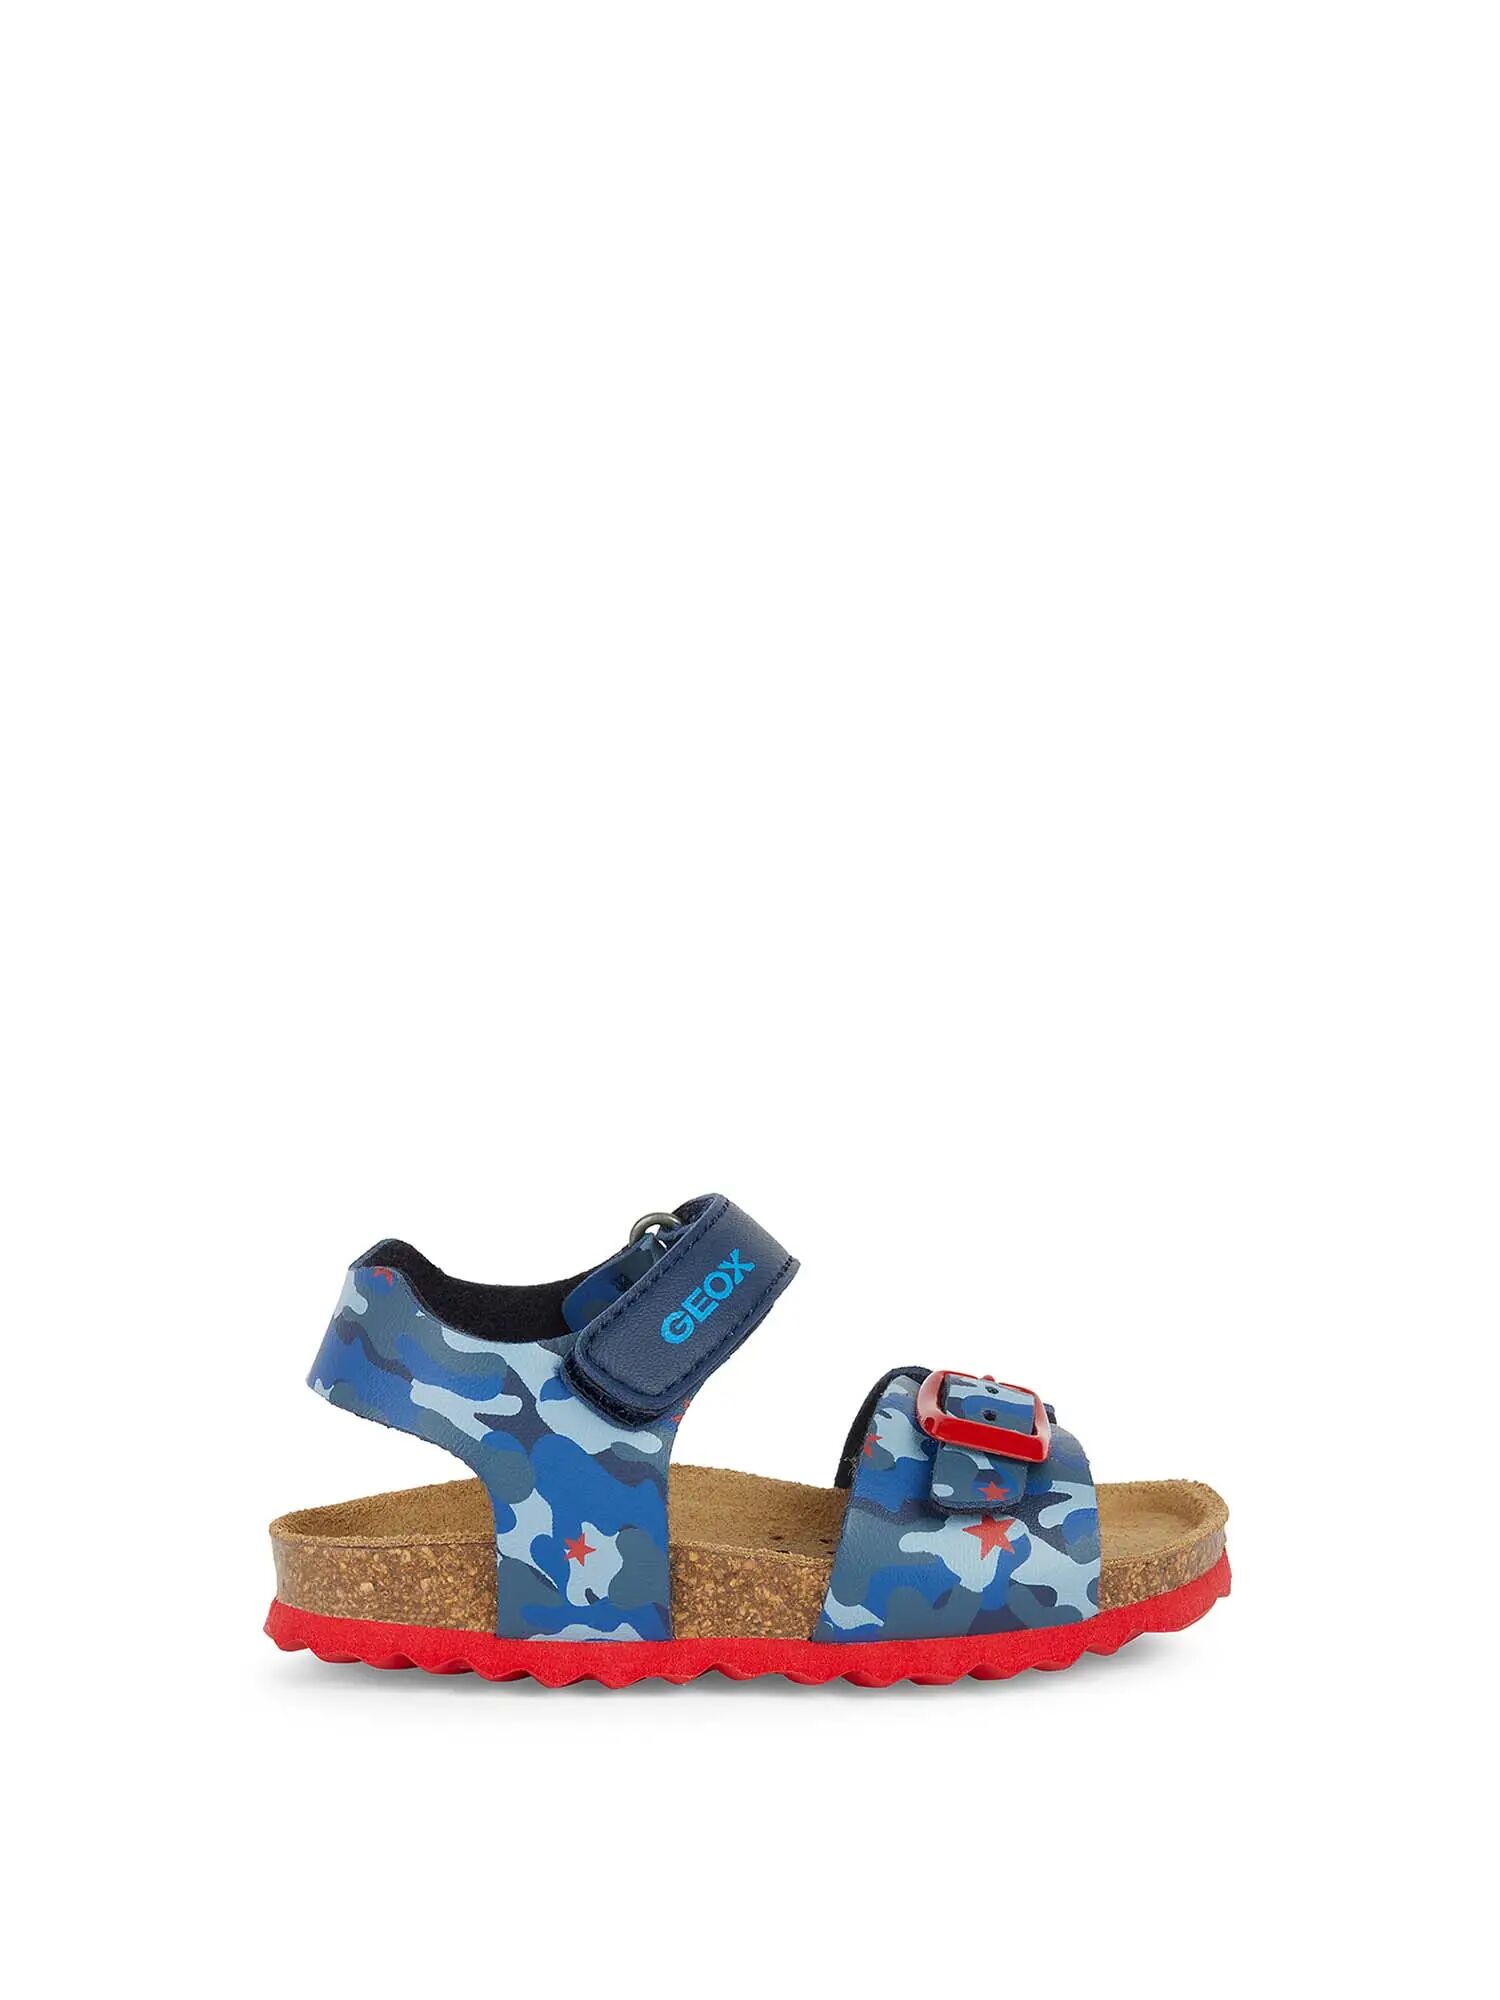 Geox Sandali Bambino Colore Navy/rosso NAVY/ROSSO 20